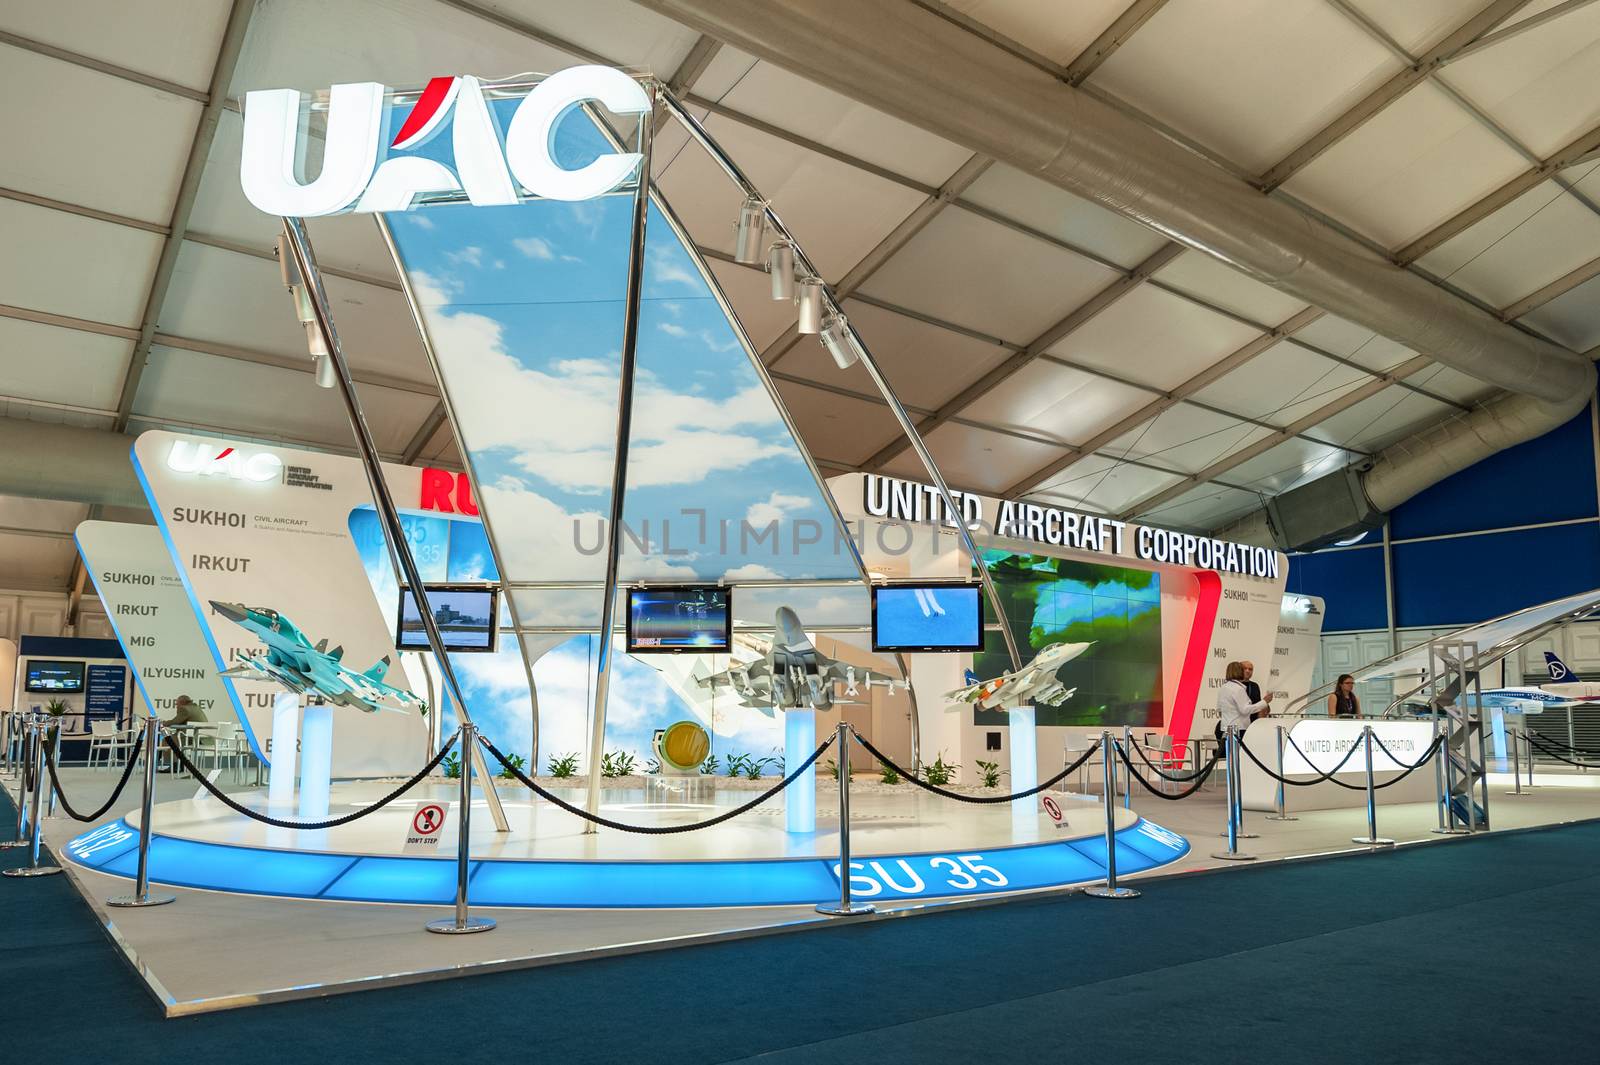 Farnborough, UK - July 12, 2012: The United Aircraft Corporation (UAC) exhibition stand representing the Russian aviation industry at Farnborough International Airshow, UK